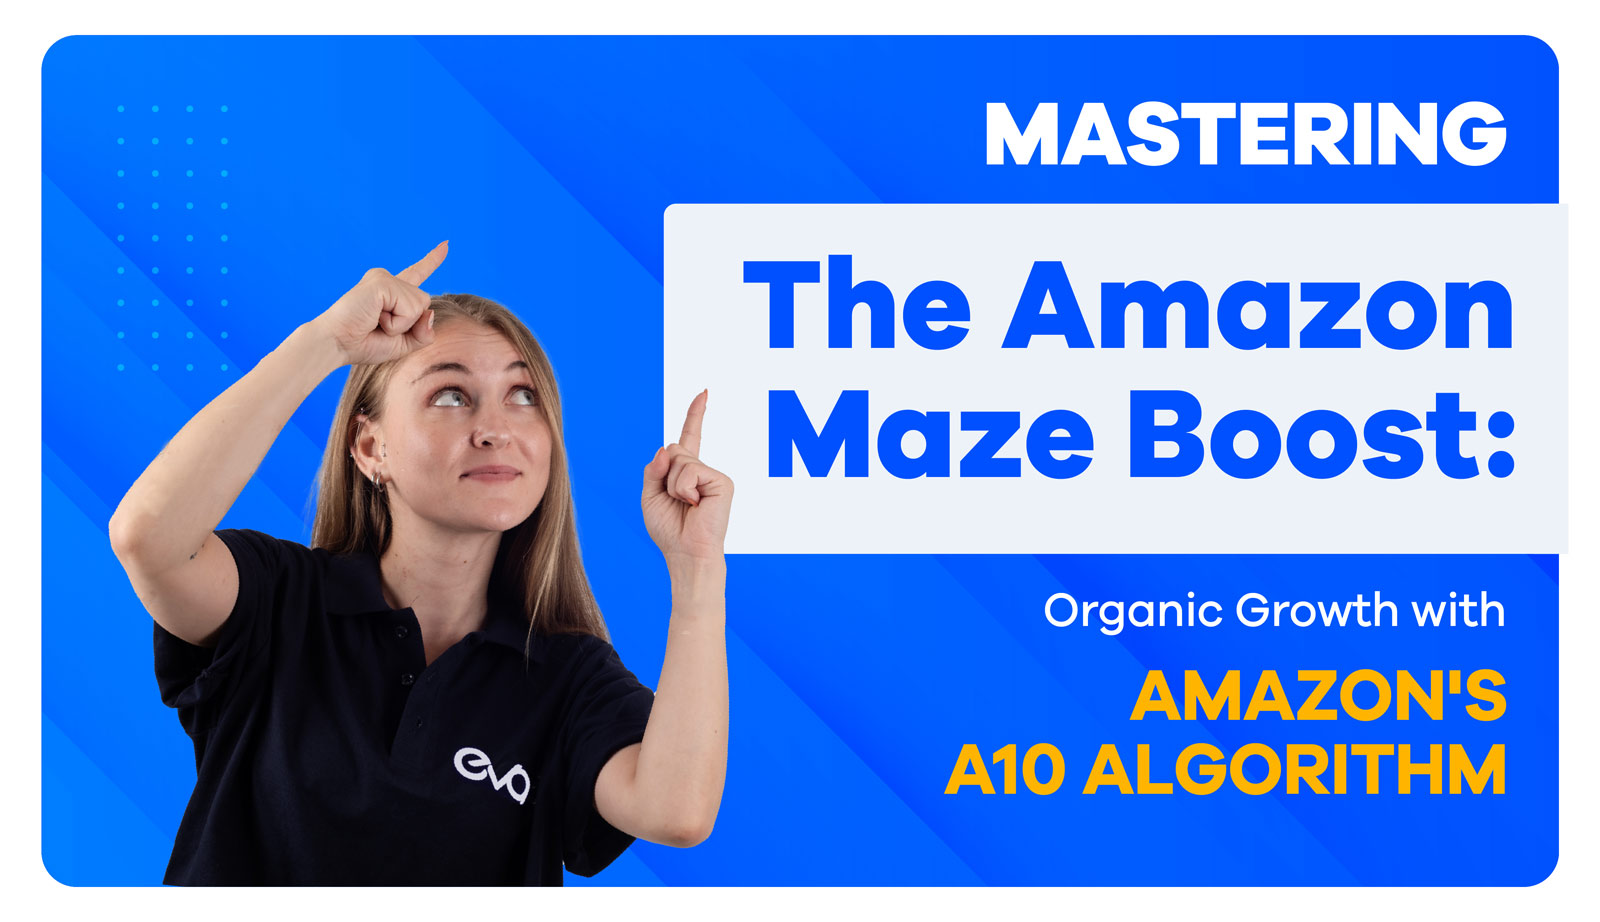 Mastering The Amazon Maze Boost Organic Growth With Amazon's A10 Algorithm